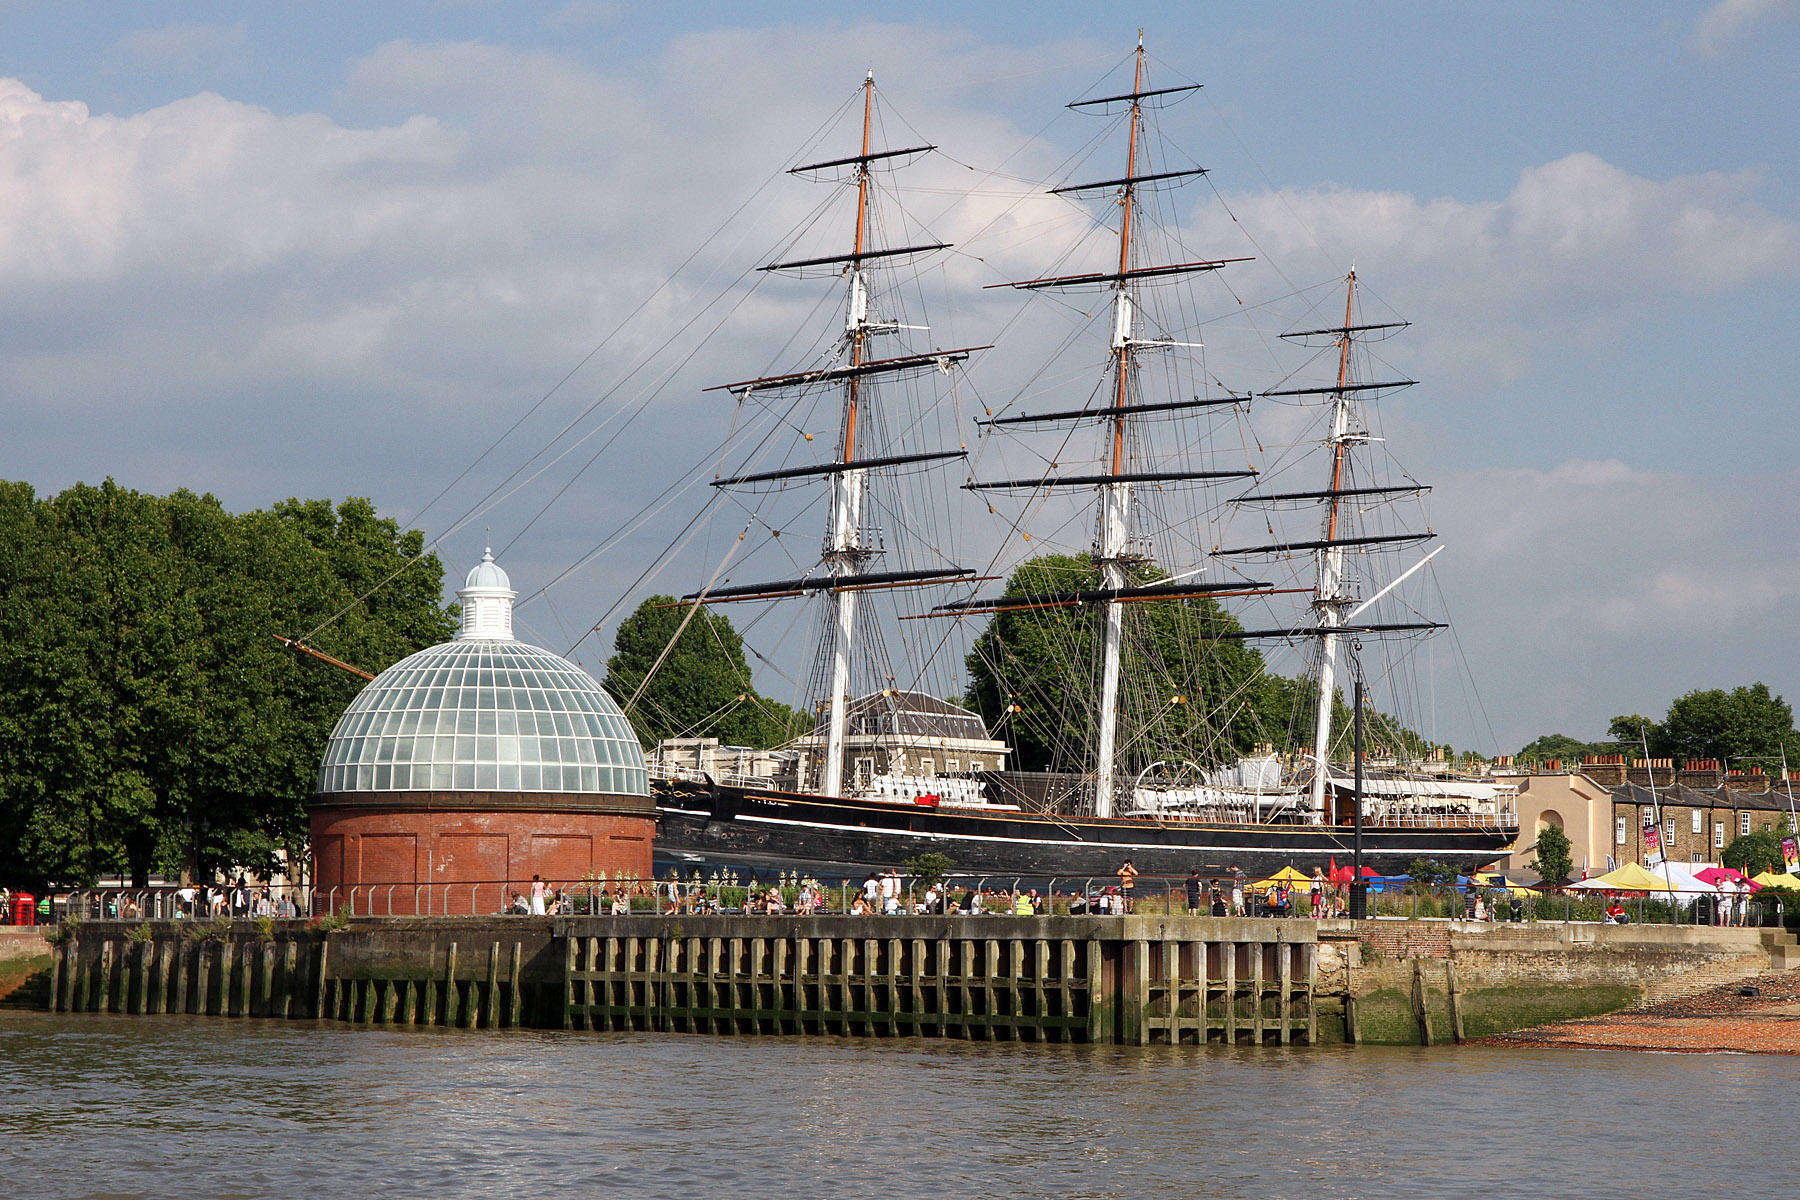 After an extremely long ride (Blackberry Cars - but not their fault) from Heathrow we made it  to Greenwich Pier